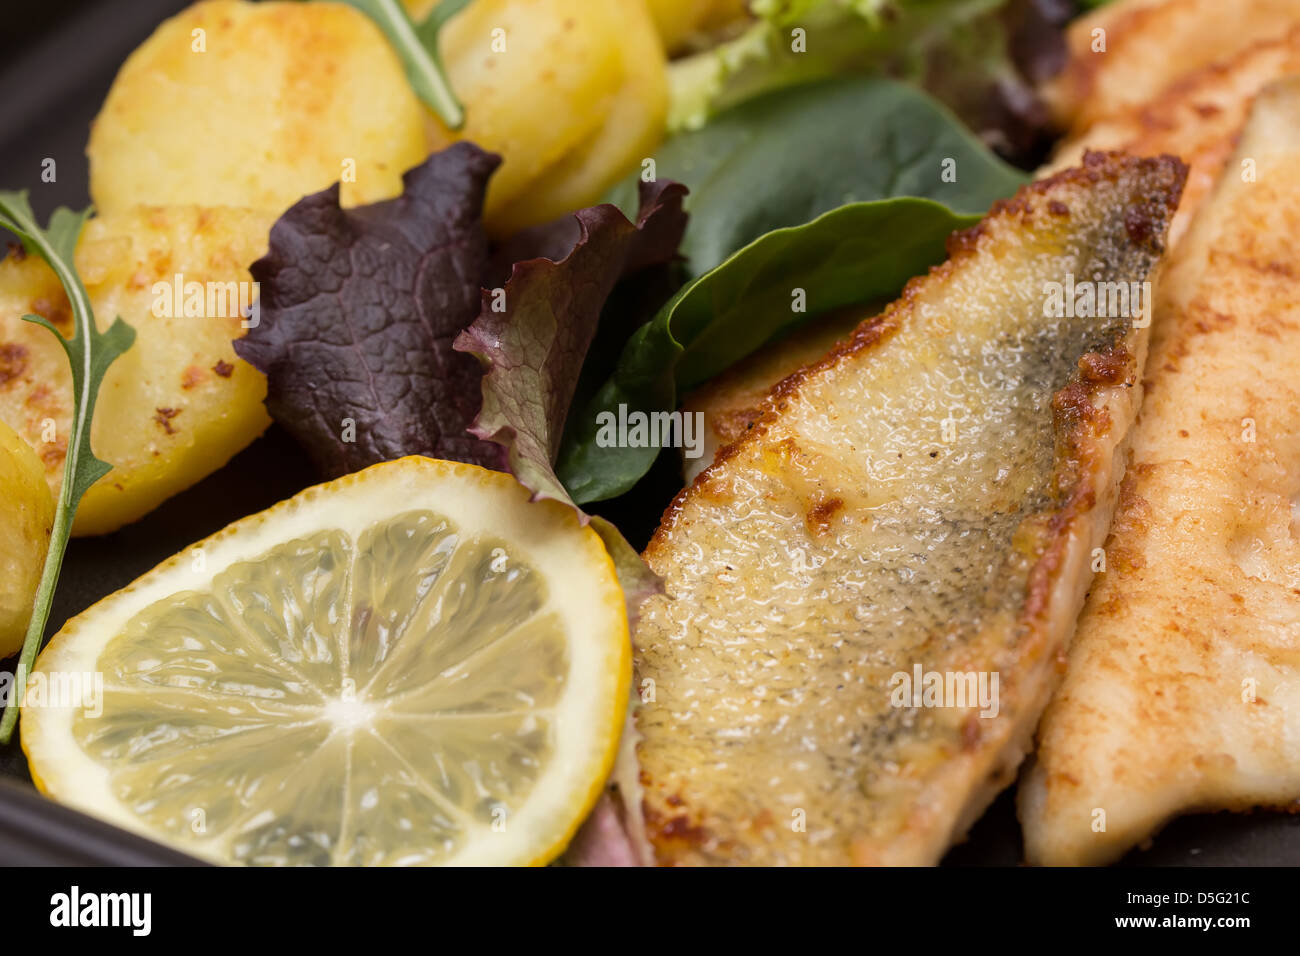 Fried perch filets with potatoes, lemon and salad in a black plate Stock Photo